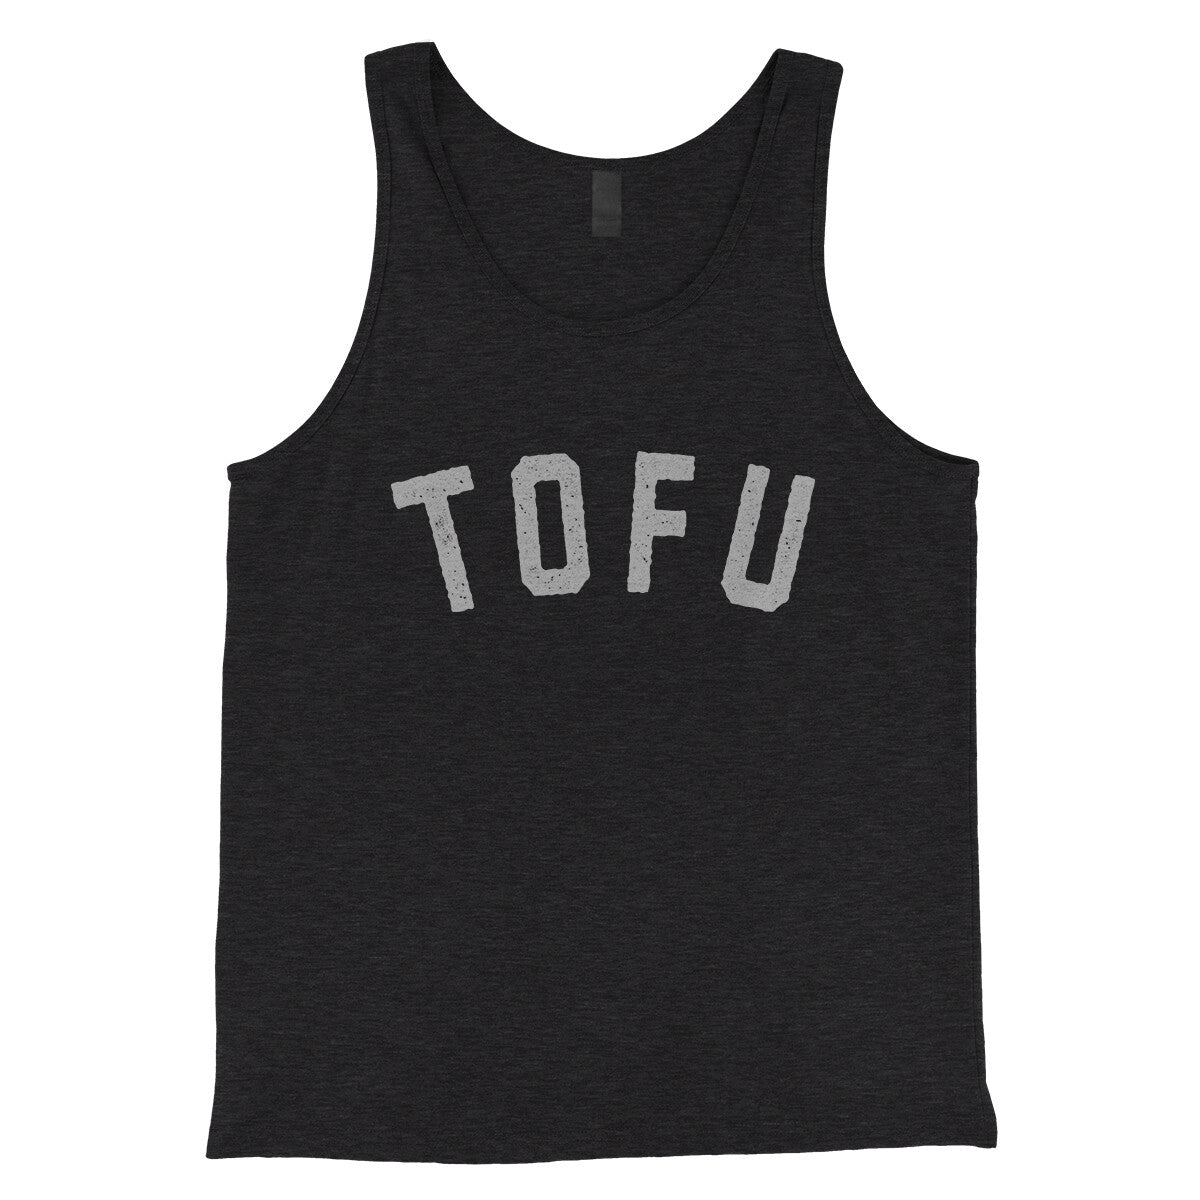 Tofu in Charcoal Black TriBlend Color